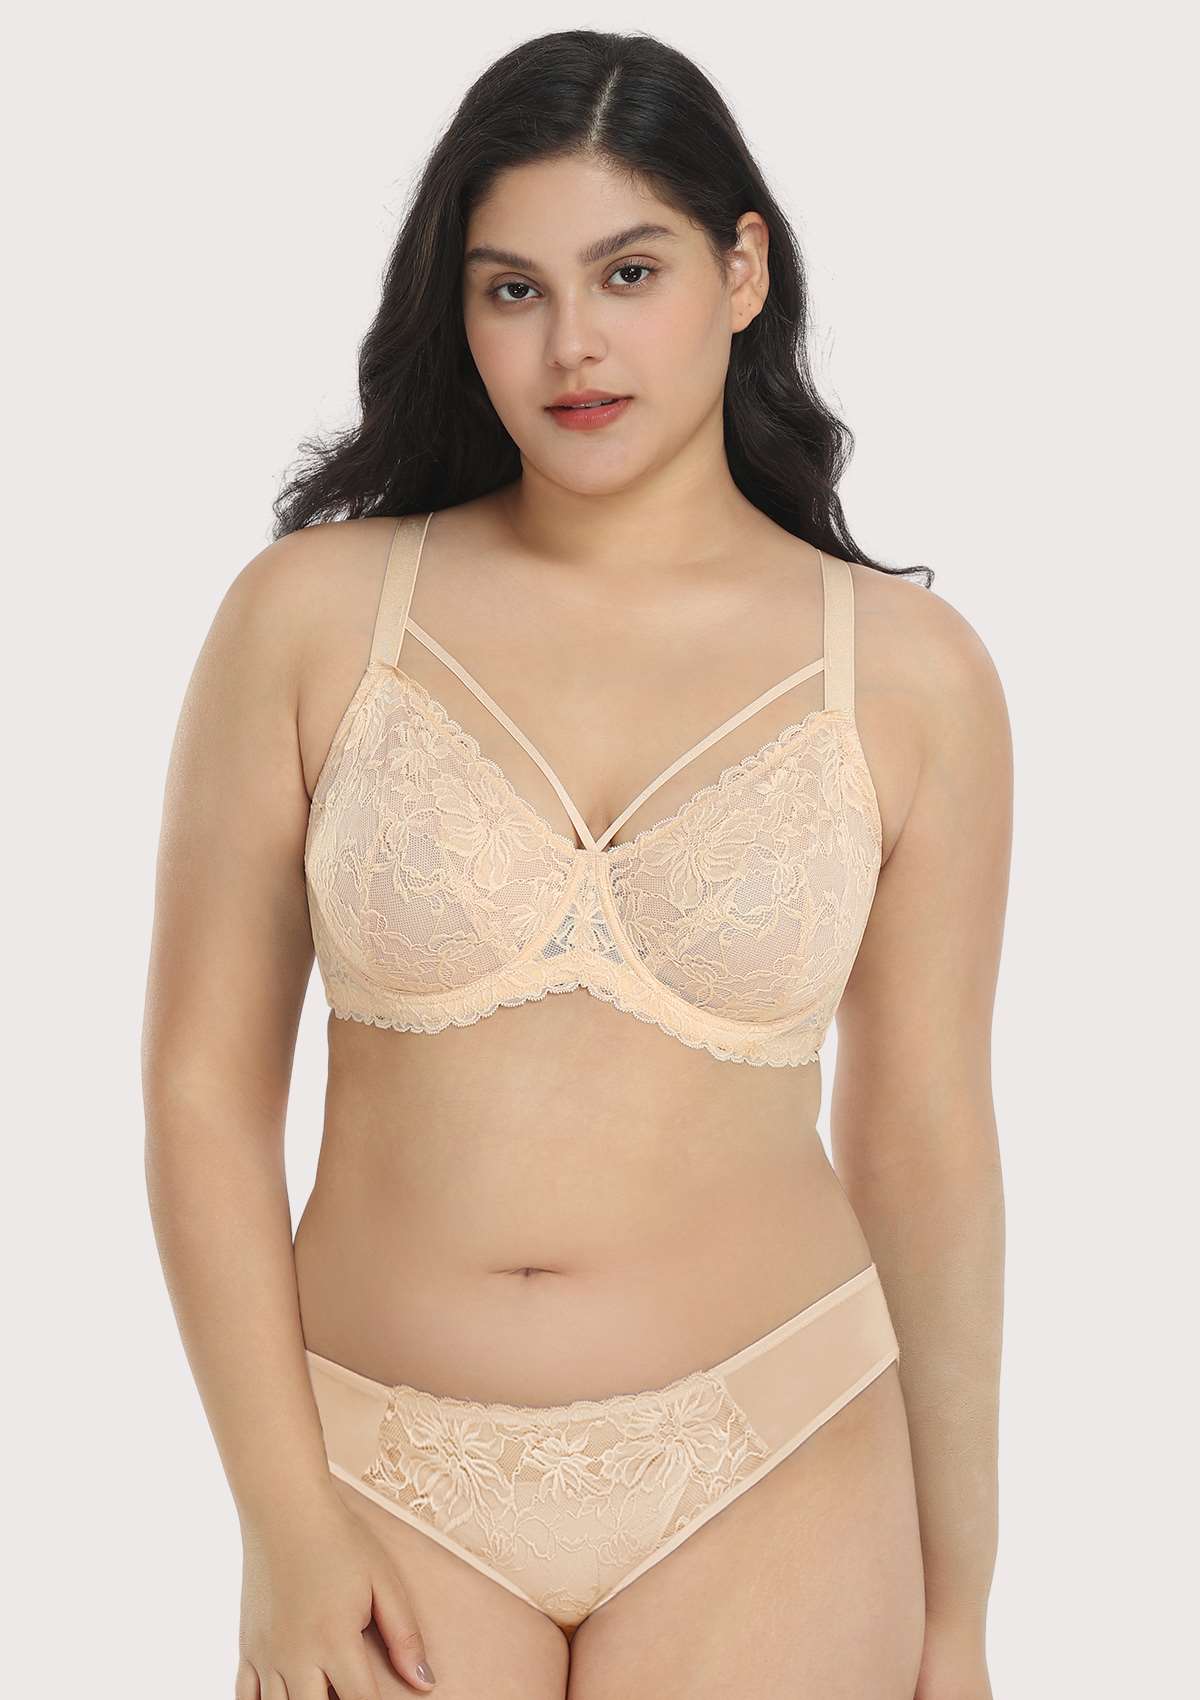 HSIA Pretty In Petals Lace Bra And Panty Set: Comfortable Support Bra - Beige Cream / 44 / G